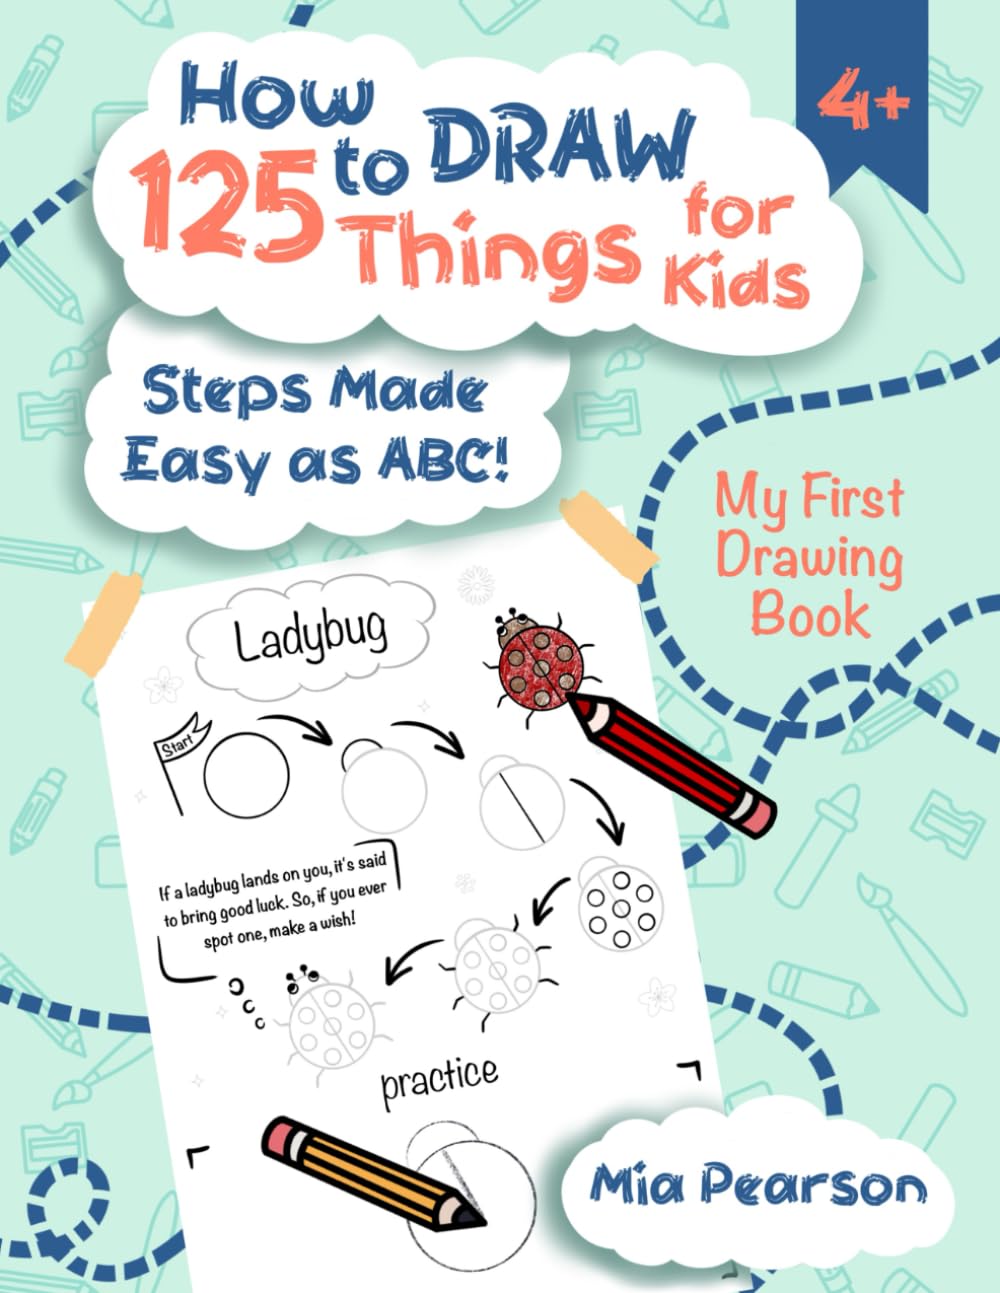 How to Draw 125 Things for Kids. My First Drawing book: Steps Made Easy as ABC! Step-by-Step Fun Drawings